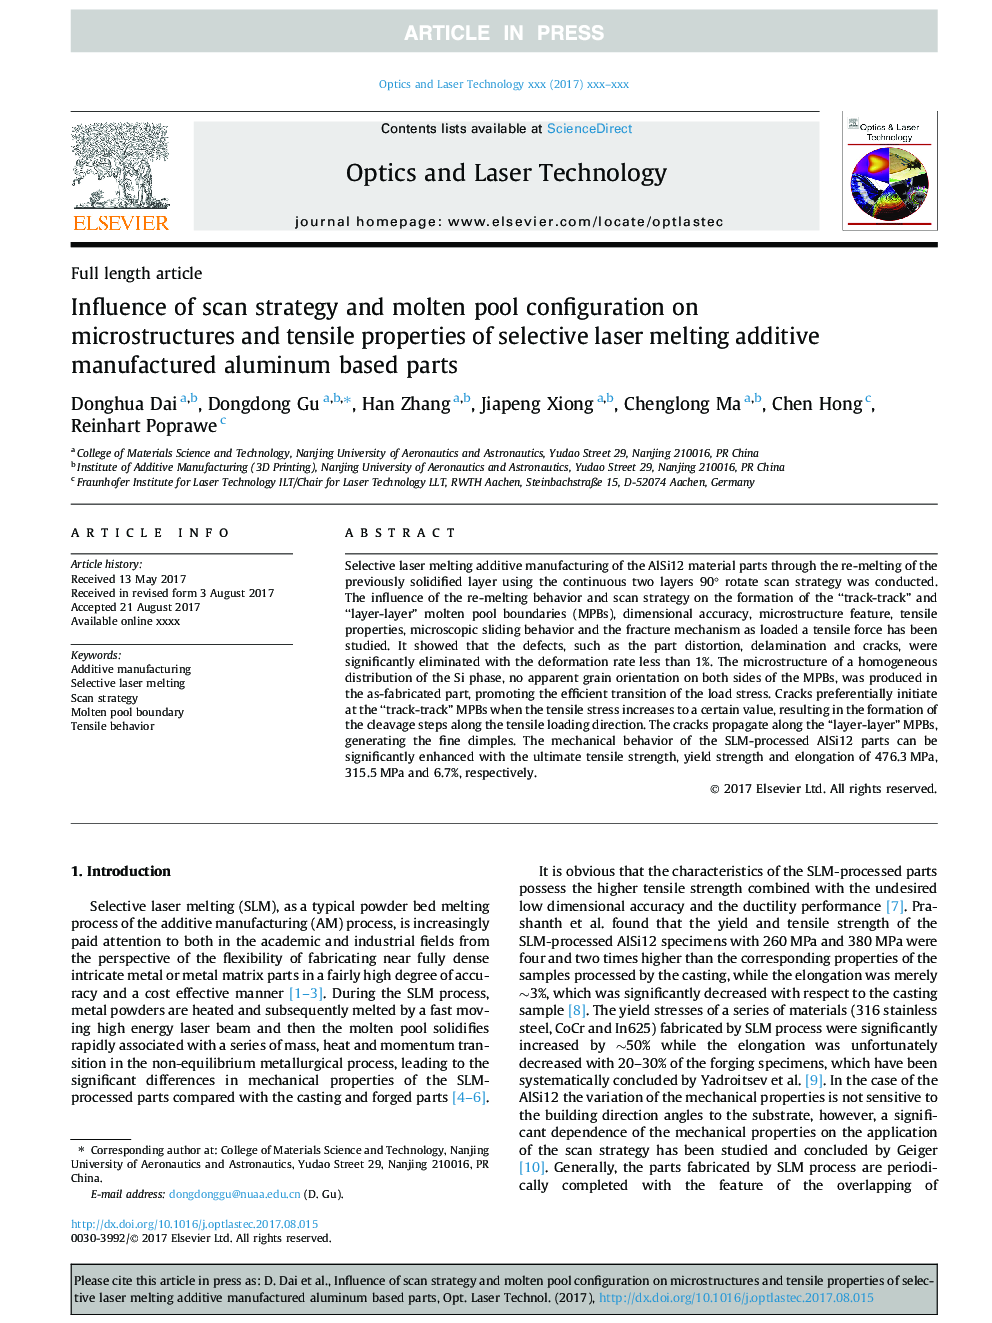 Influence of scan strategy and molten pool configuration on microstructures and tensile properties of selective laser melting additive manufactured aluminum based parts